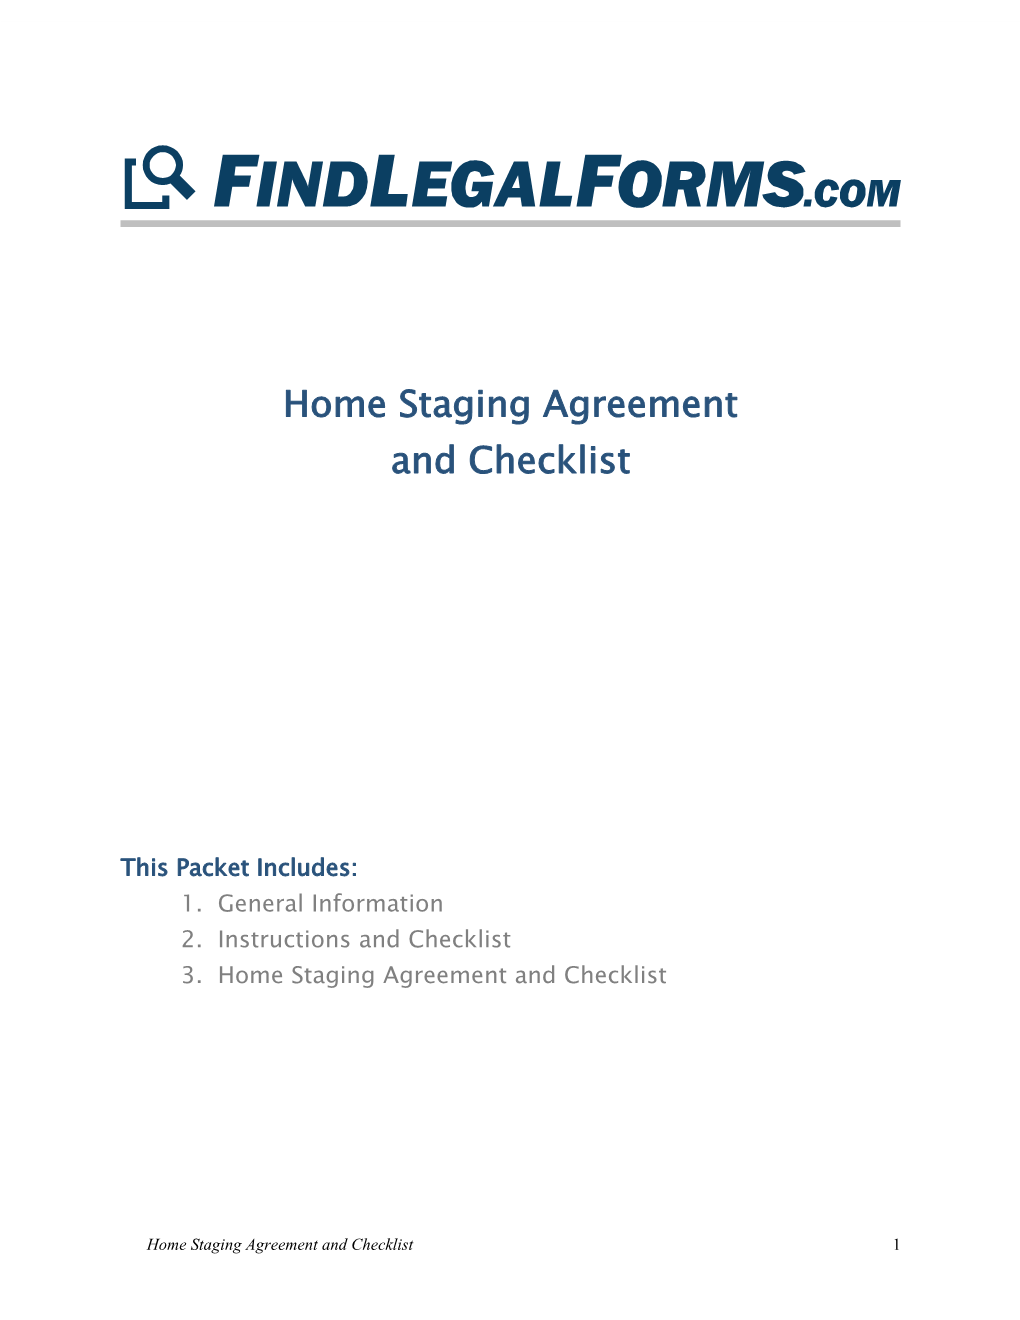 Home Staging Agreement and Checklist